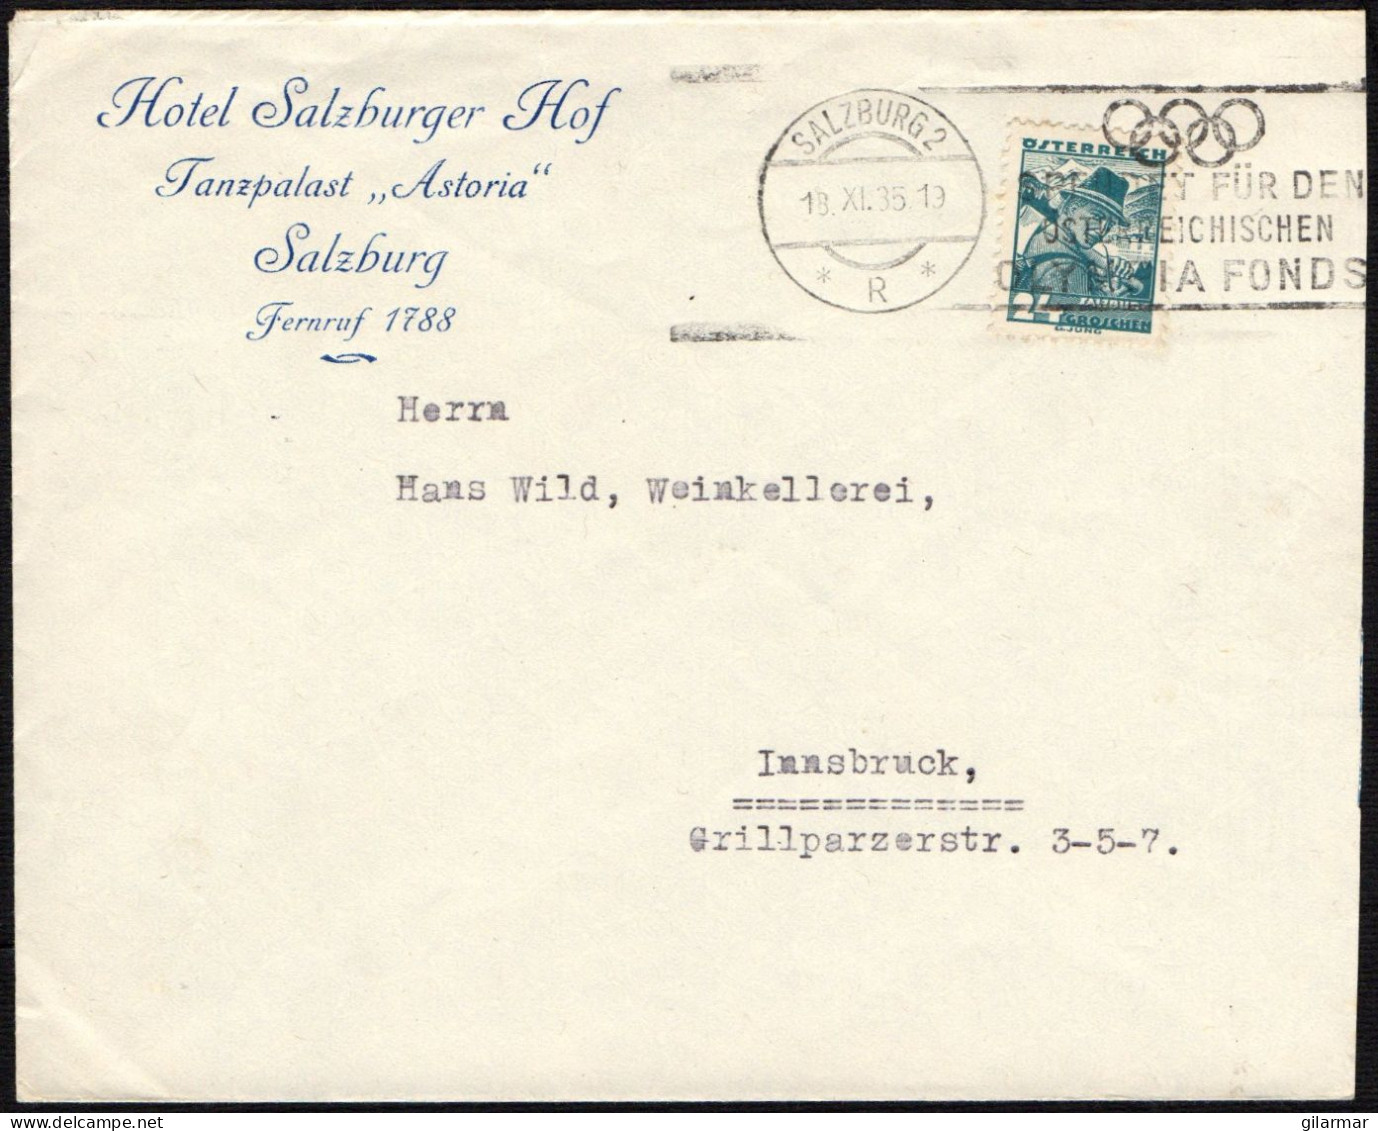 OLYMPIC GAMES 1936 - AUSTRIA SALZBURG 1935 - DONATE TO THE AUSTRIAN OLYMPIC FUND - MAILED ENVELOPE - M - Estate 1936: Berlino